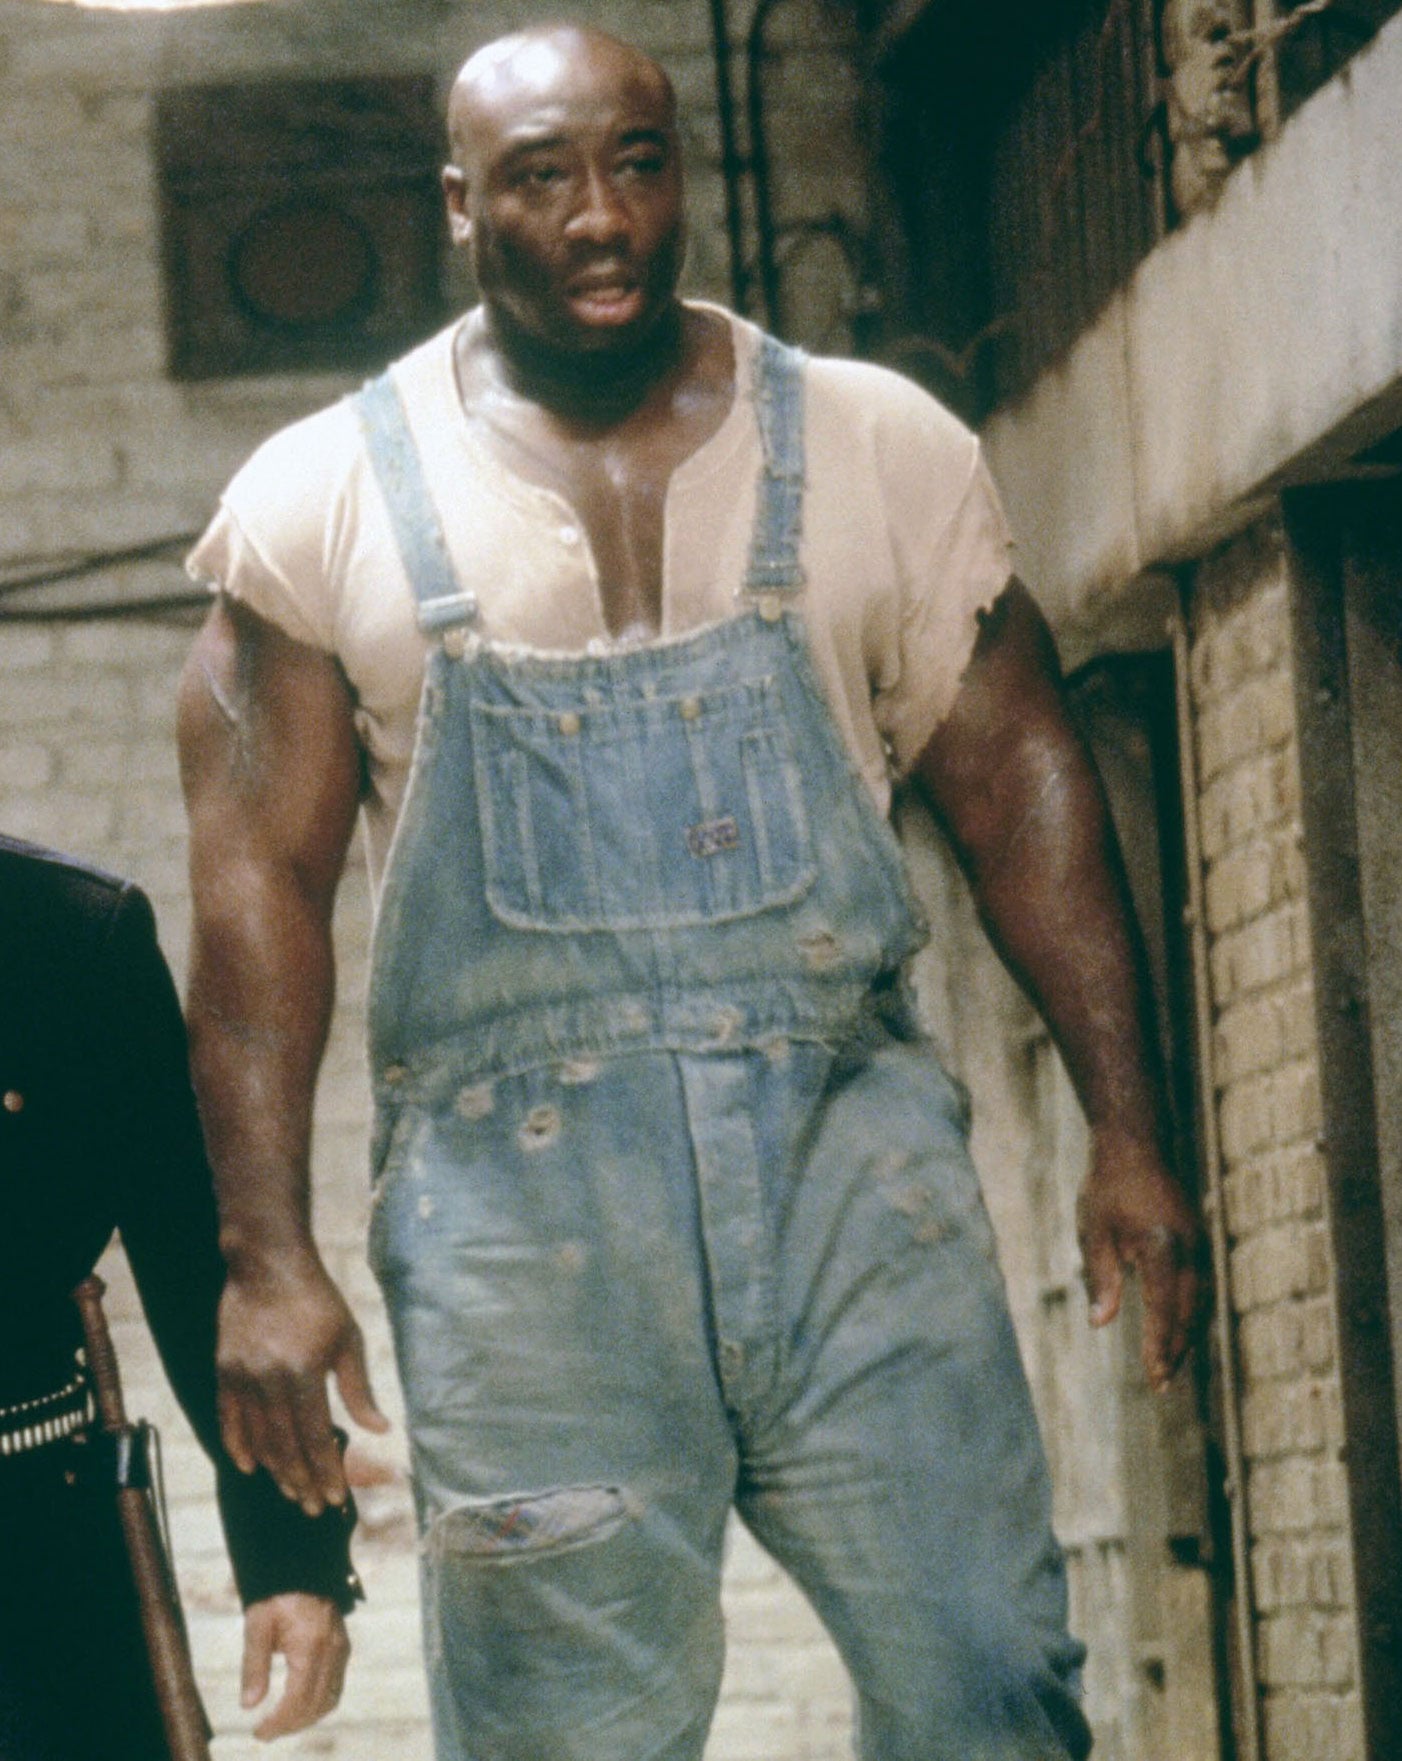 The green mile